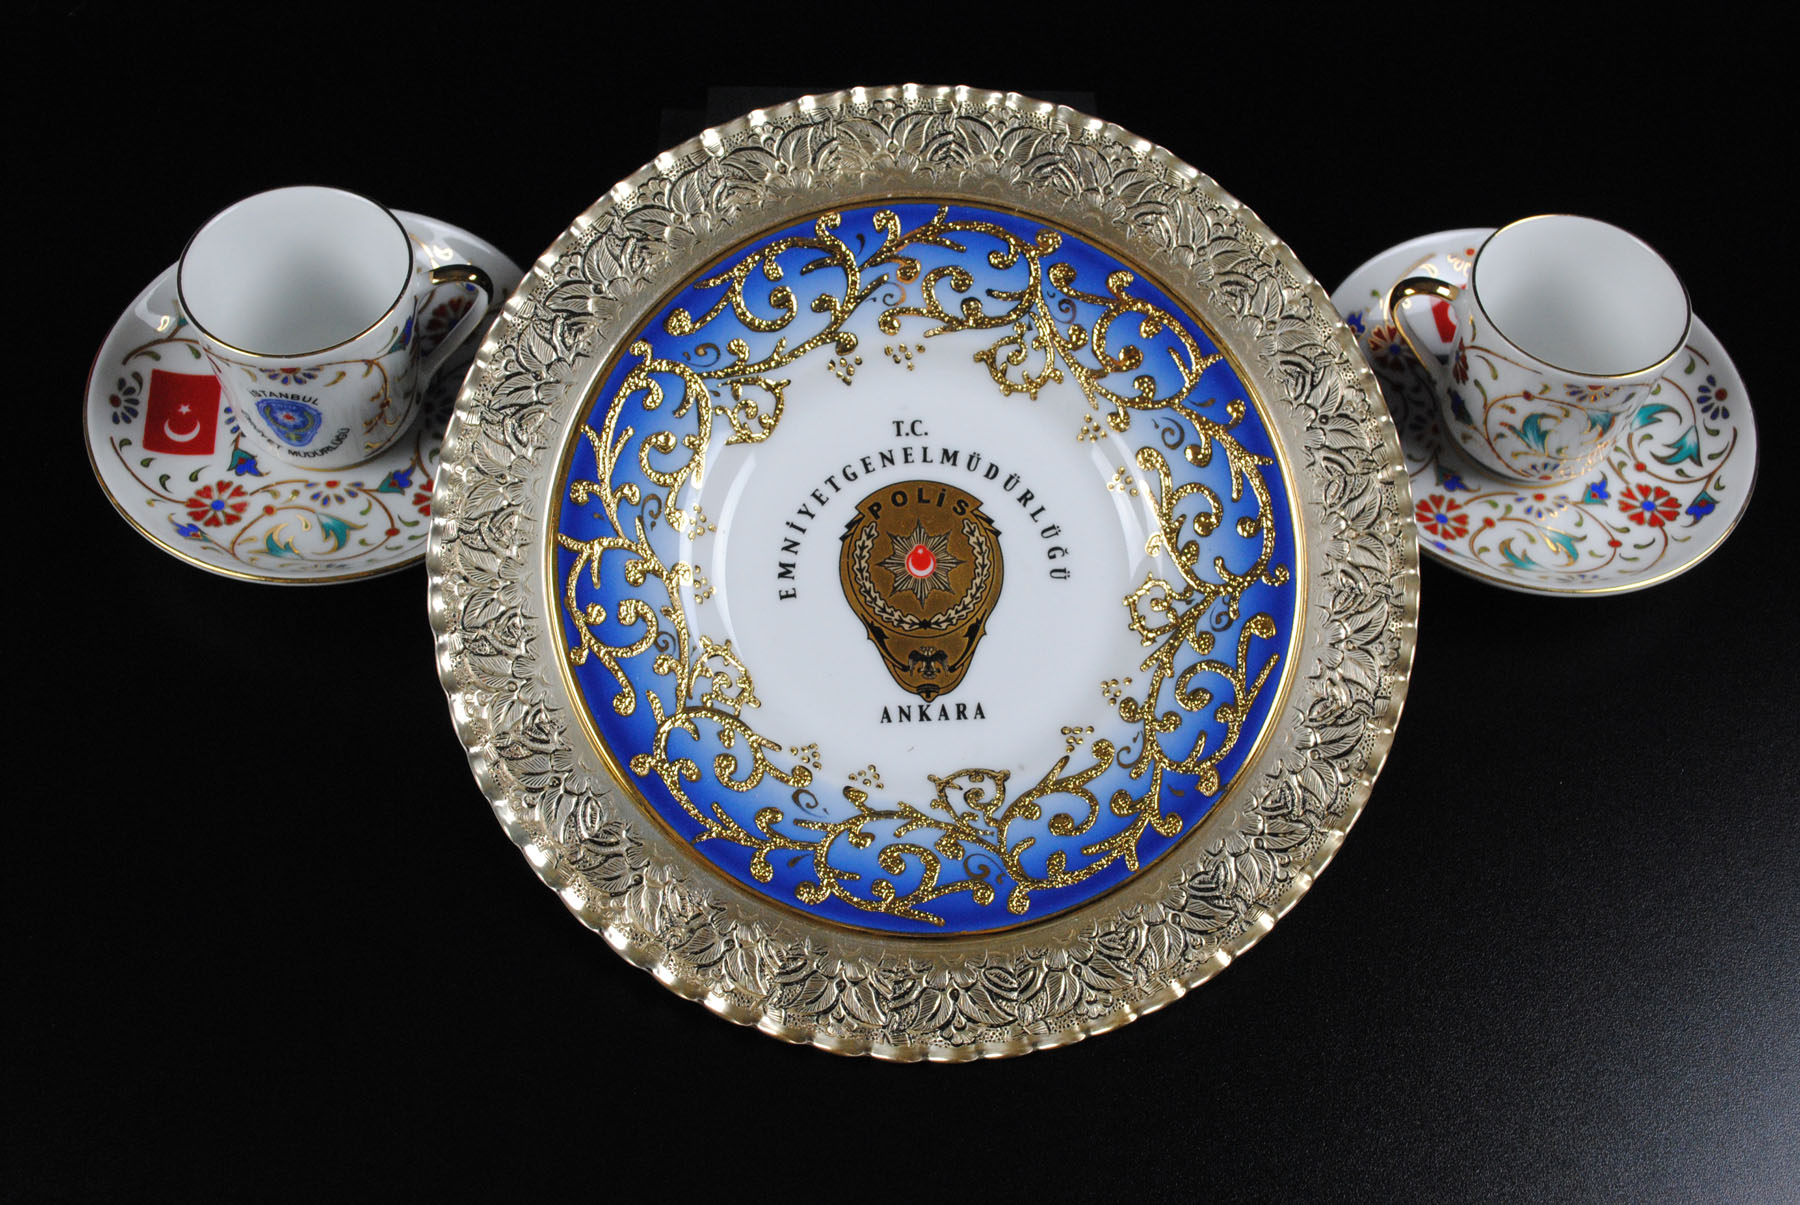 Turkish Porcelain Dish and Tea Cups of Attorney General Jim Petro 